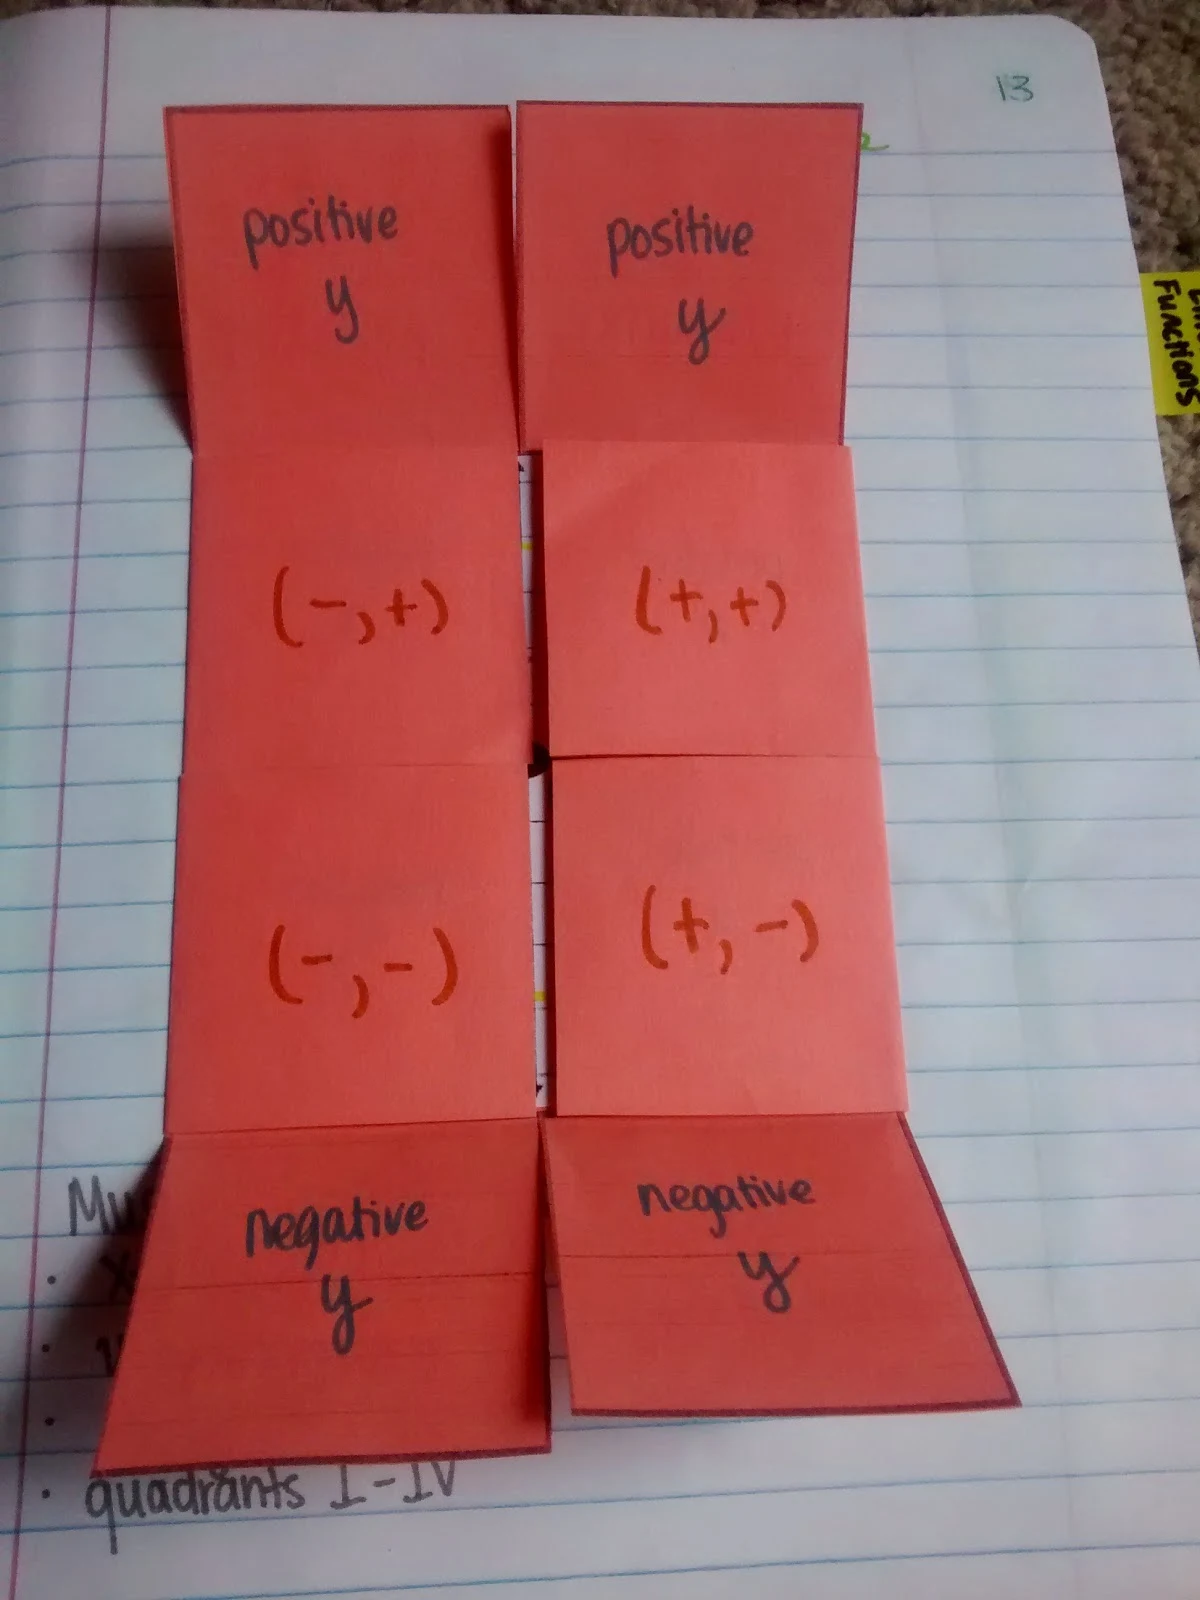 parts of the coordinate plane foldable